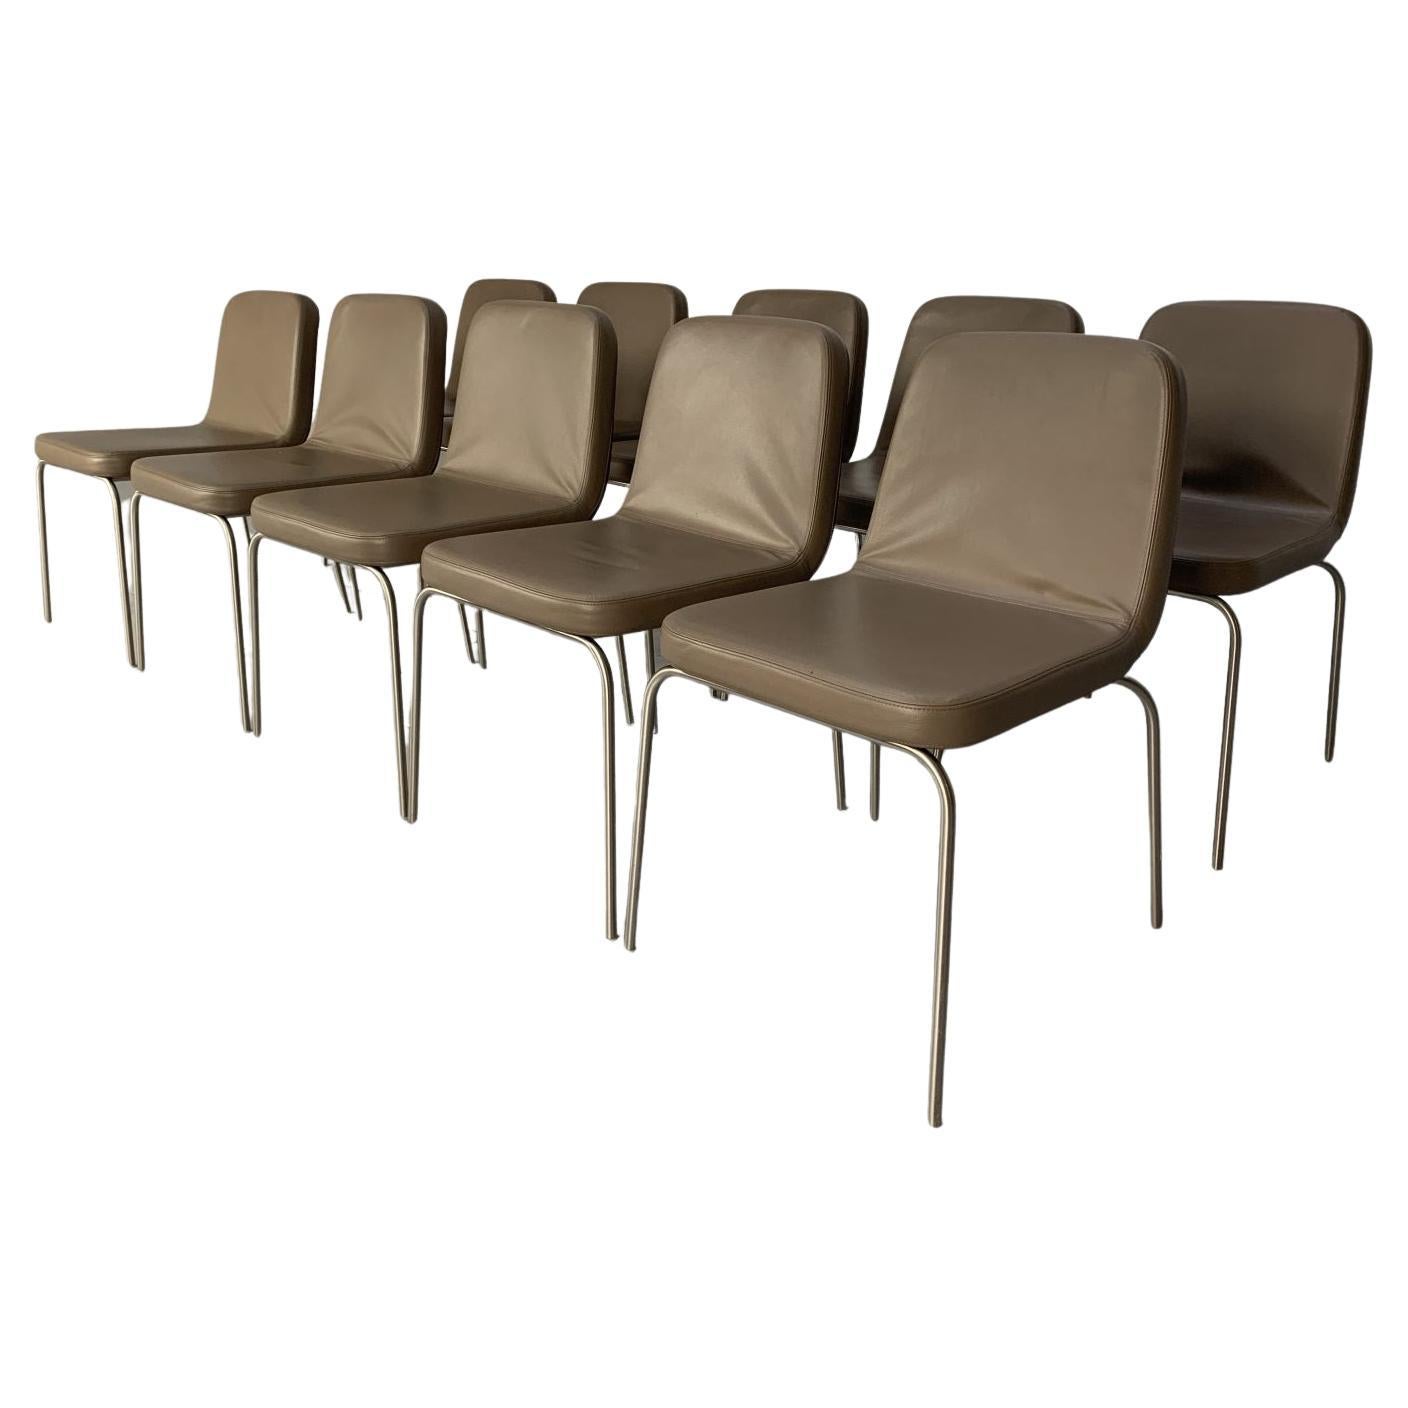 10 Minotti “Arp 1” Dining Chairs, in Taupe Leather For Sale